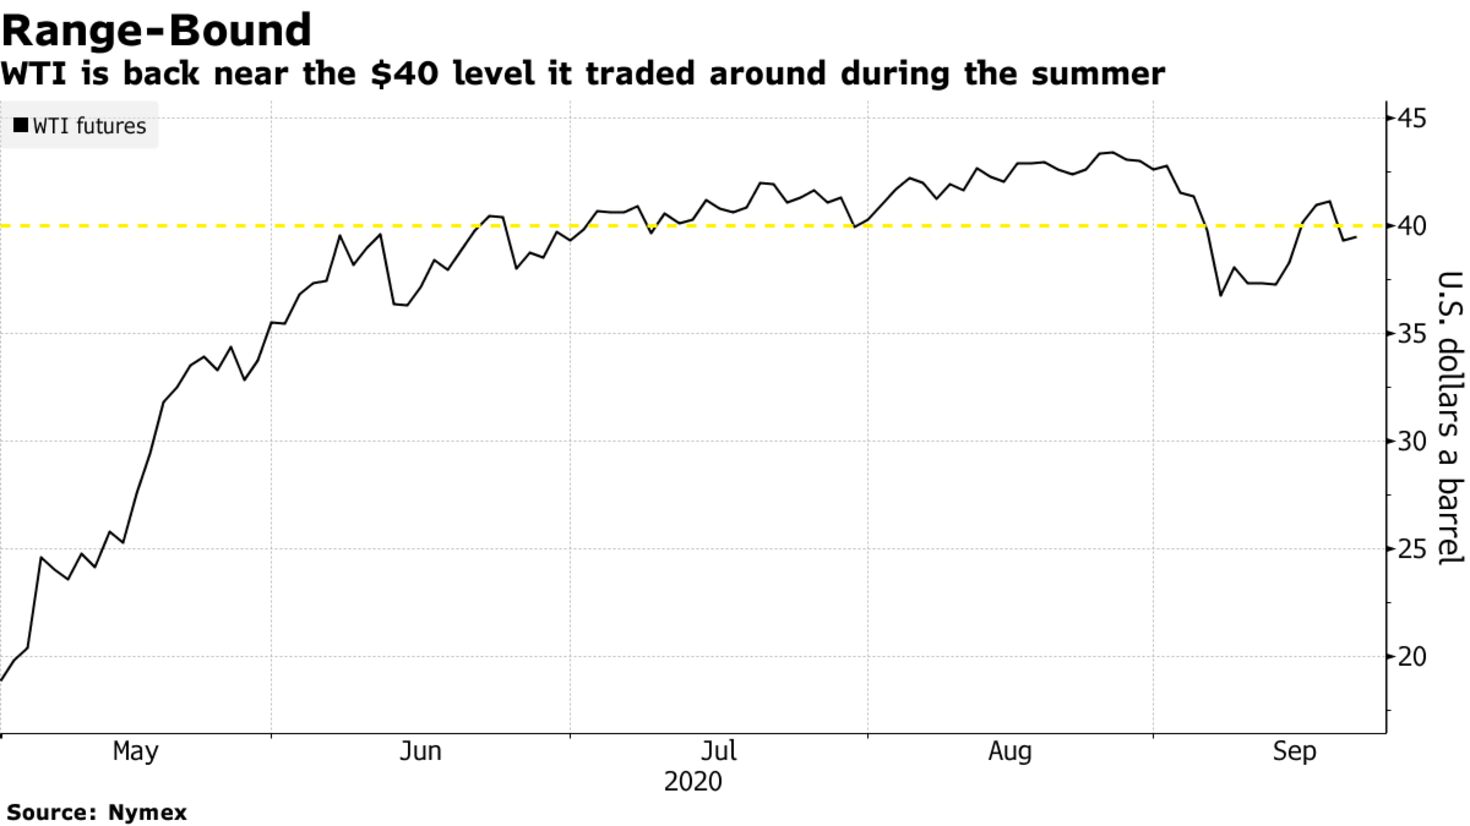 WTI is back near the $40 level it traded around during the summer